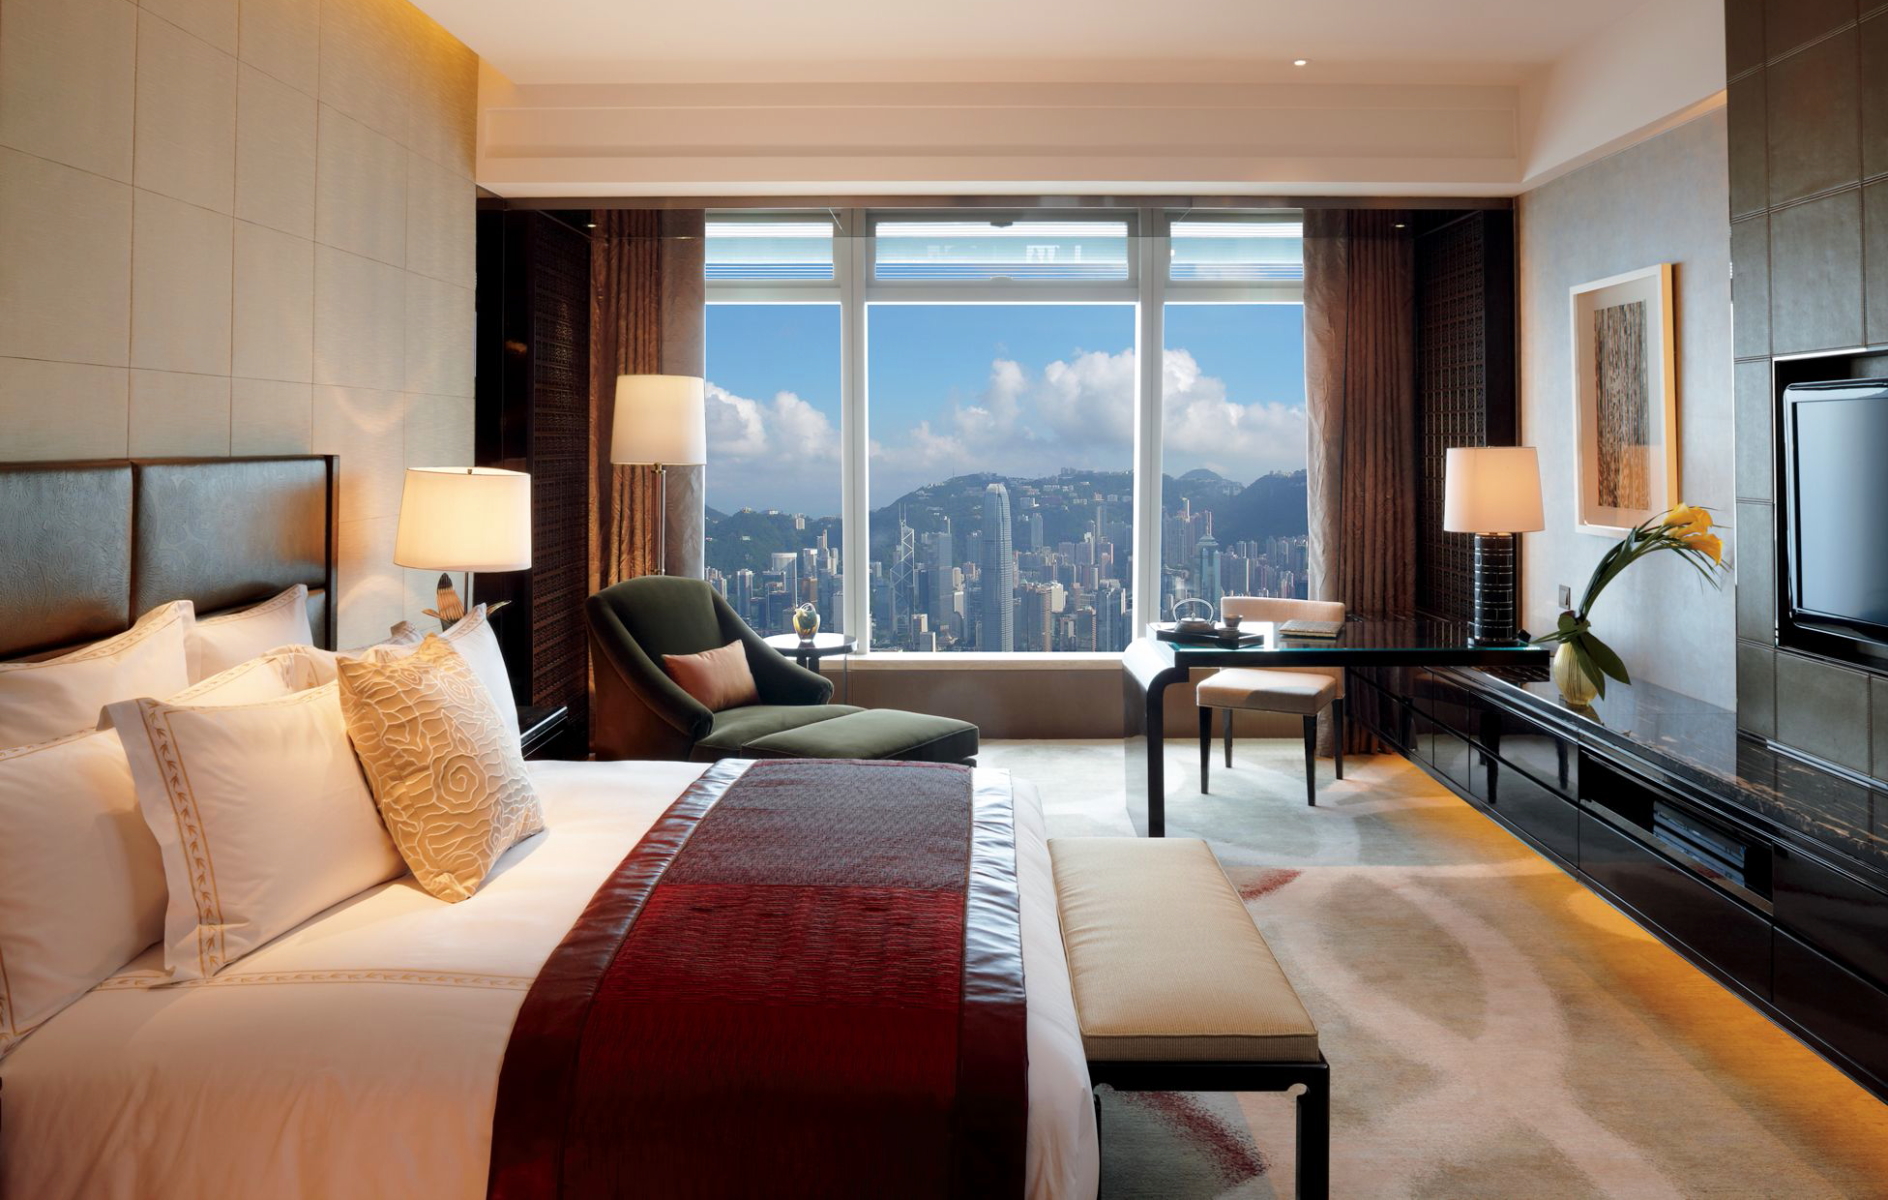 Deluxe Victoria Harbour Room at Ritz-Carlton, Hong Kong. Click to enlarge.